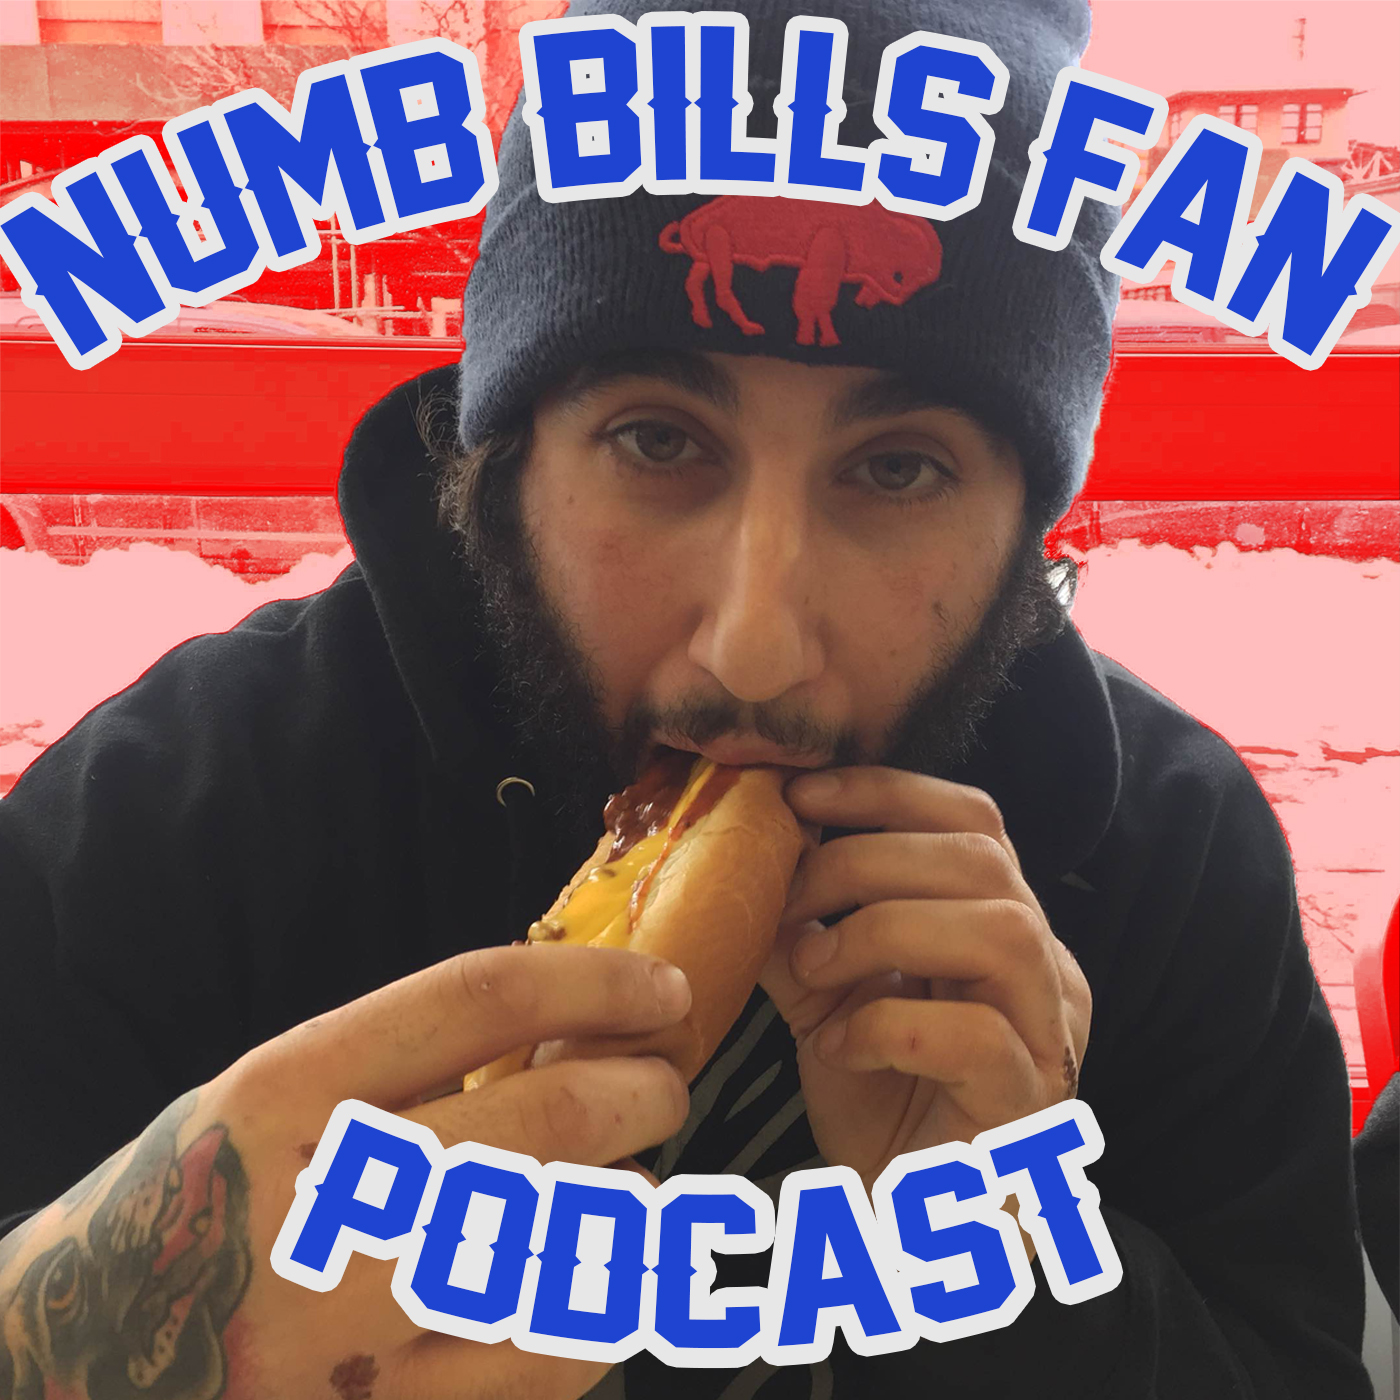 #165 Surviving the Bills Blizzard, with Jeff Knight